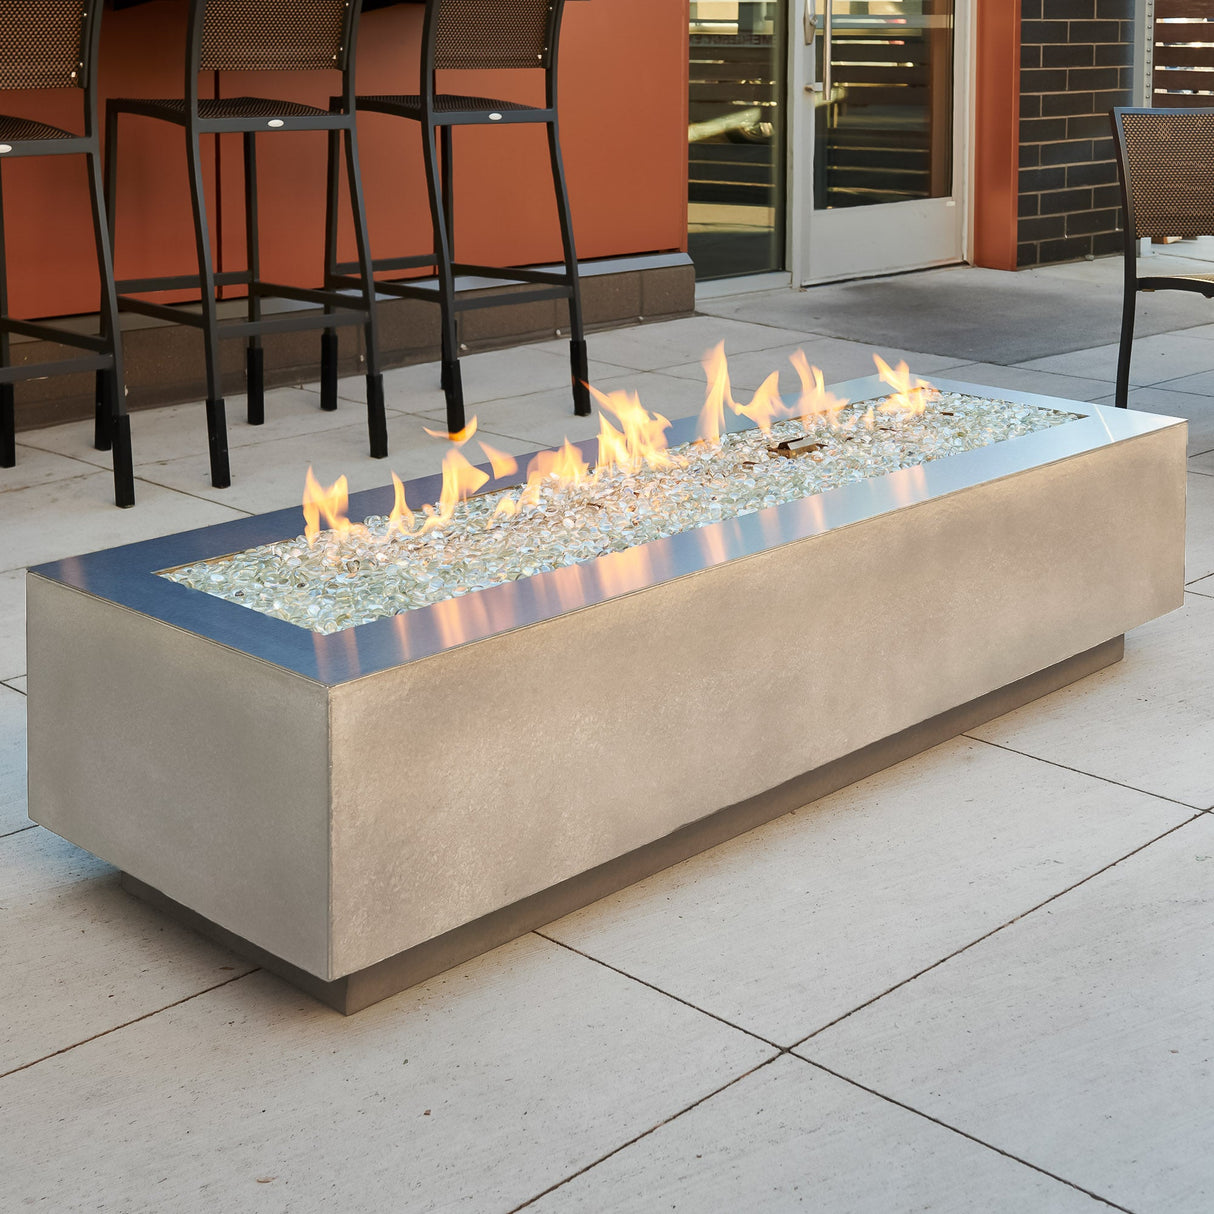 A Stainless Steel overlay placed on a Natural Grey Cove Linear Gas Fire Pit Table 72"